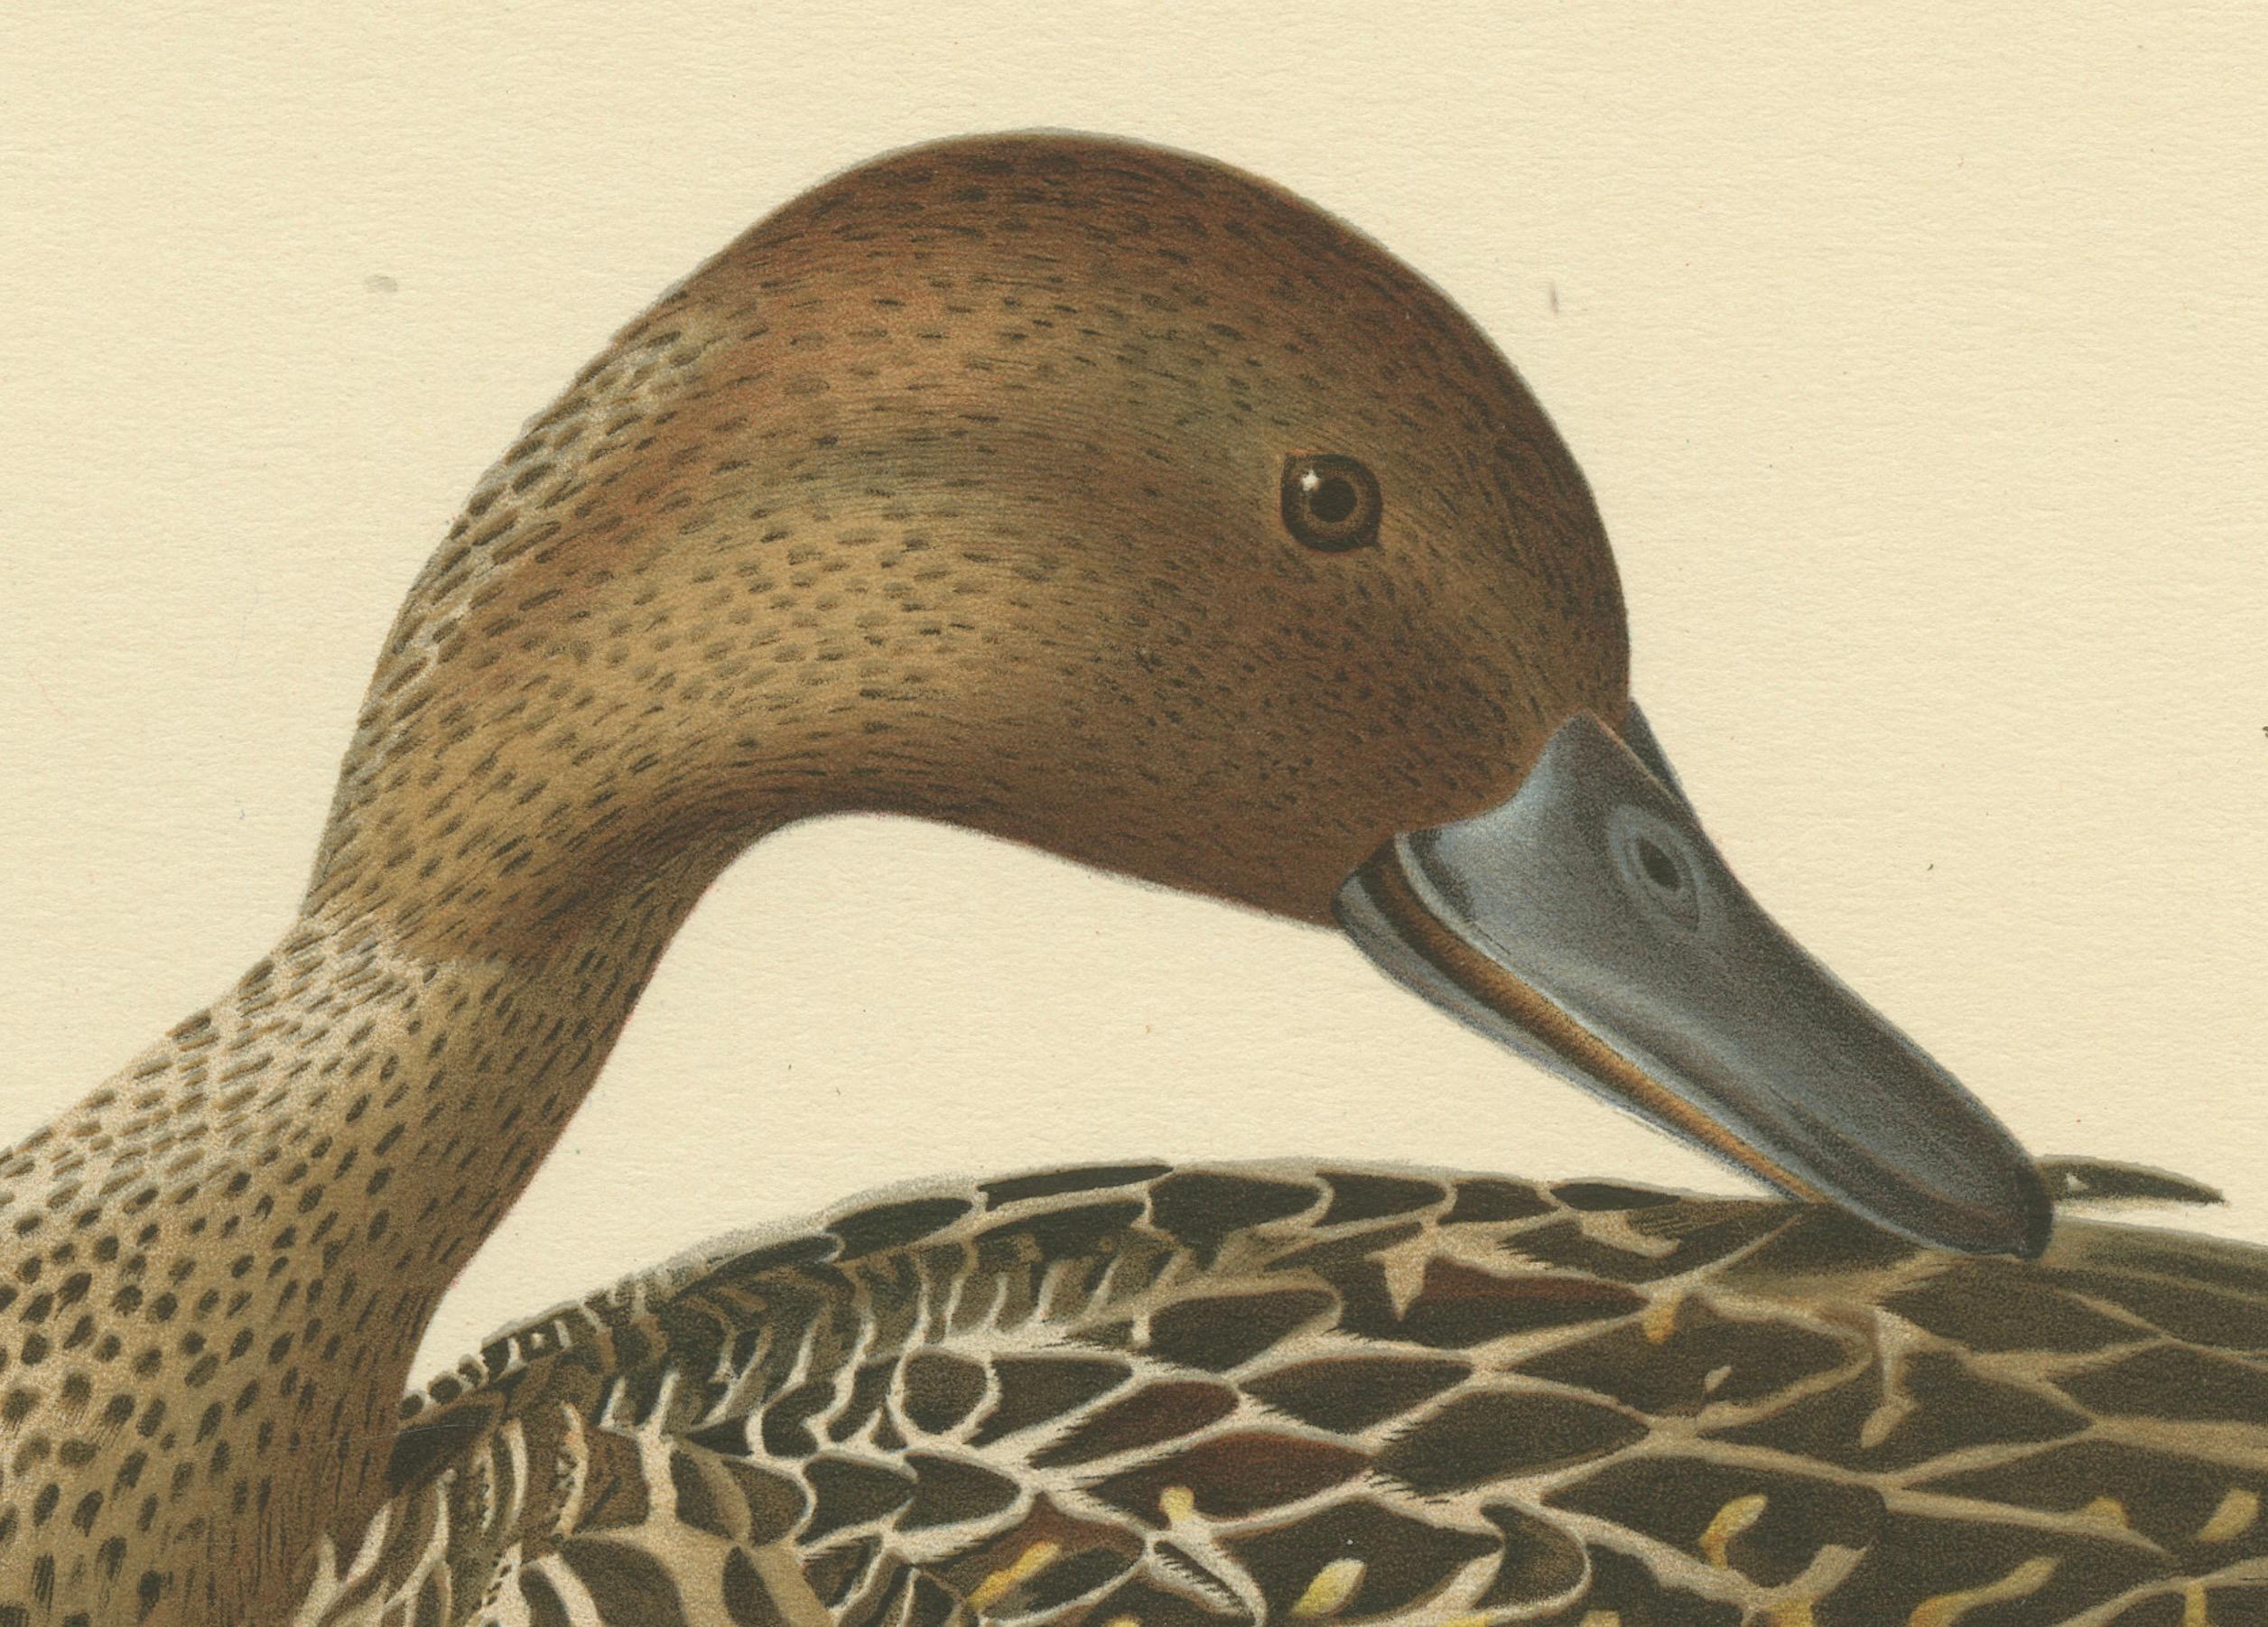 This print, titled 'Anas (Dafila) Acuta', showcases the male Northern Pintail, a bird celebrated for its elegant proportions and long, pointed tail. The illustration reveals the pintail in fine detail, capturing the nuances of its plumage—a